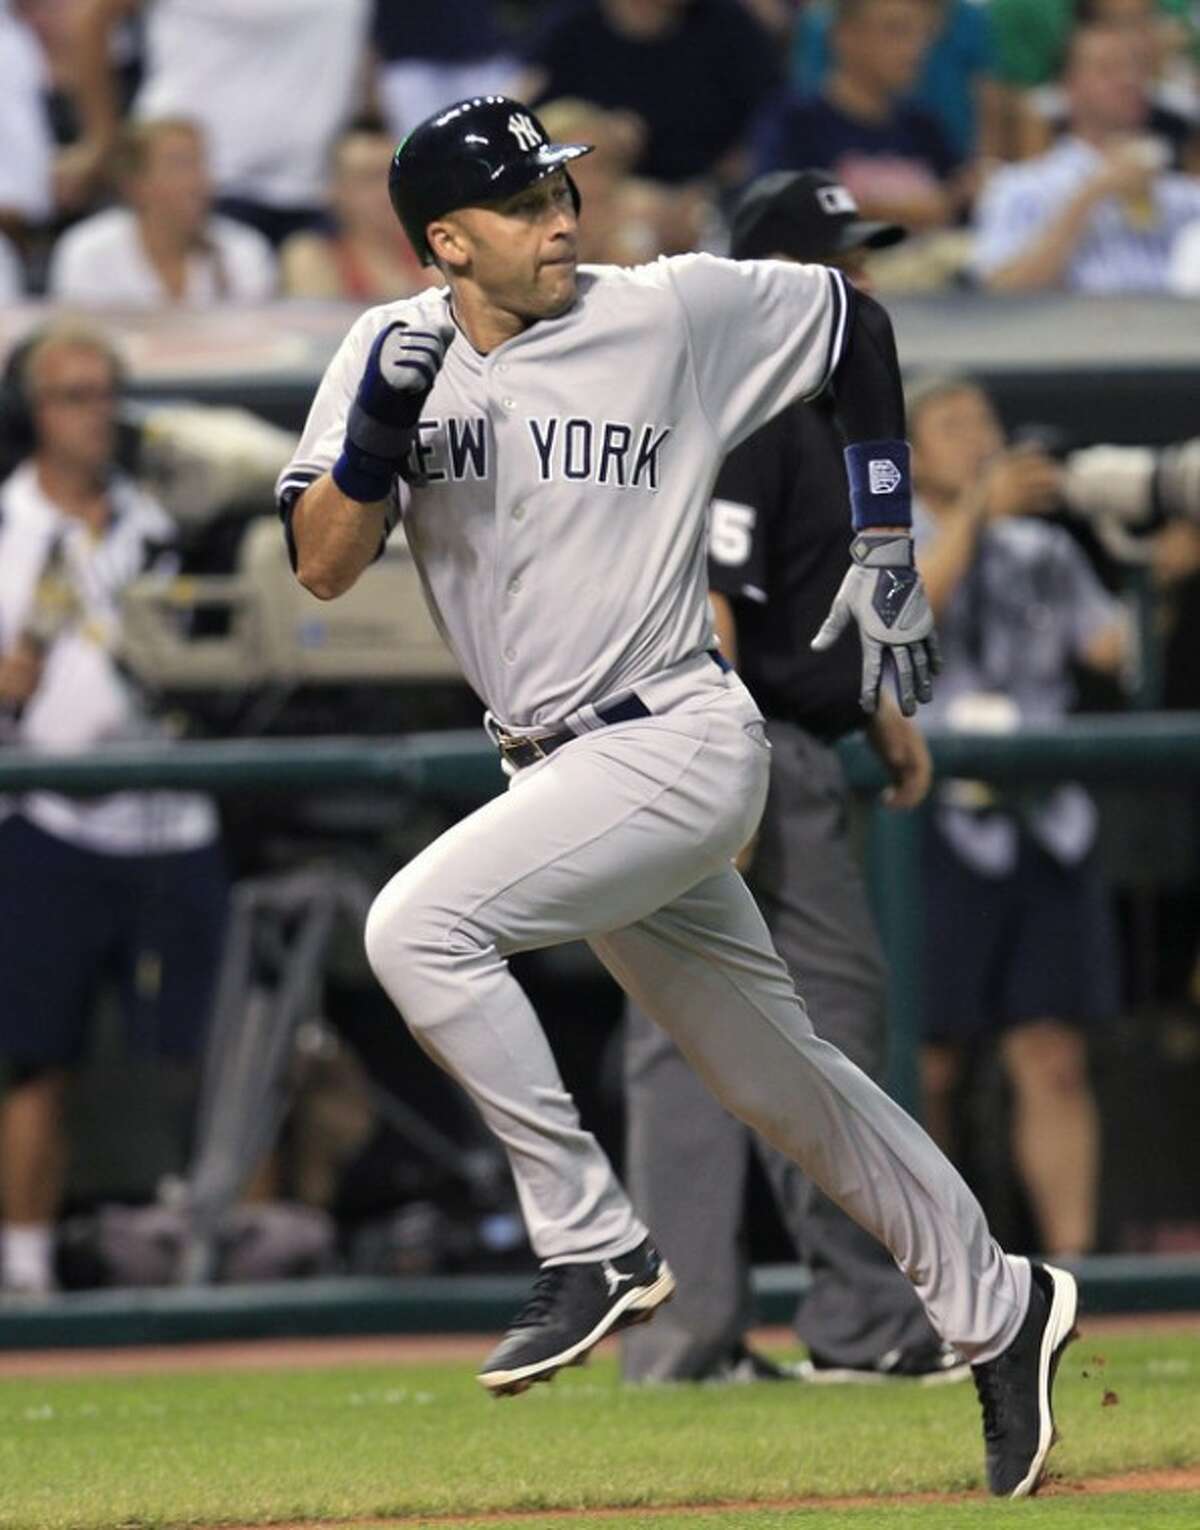 New York Yankees' Derek Jeter heads home to score on a sacrifice fly by Mark Teixeira in the sixth inning of a baseball game against the Cleveland Indians, Saturday, Aug. 25, 2012, in Cleveland. (AP Photo/Tony Dejak)